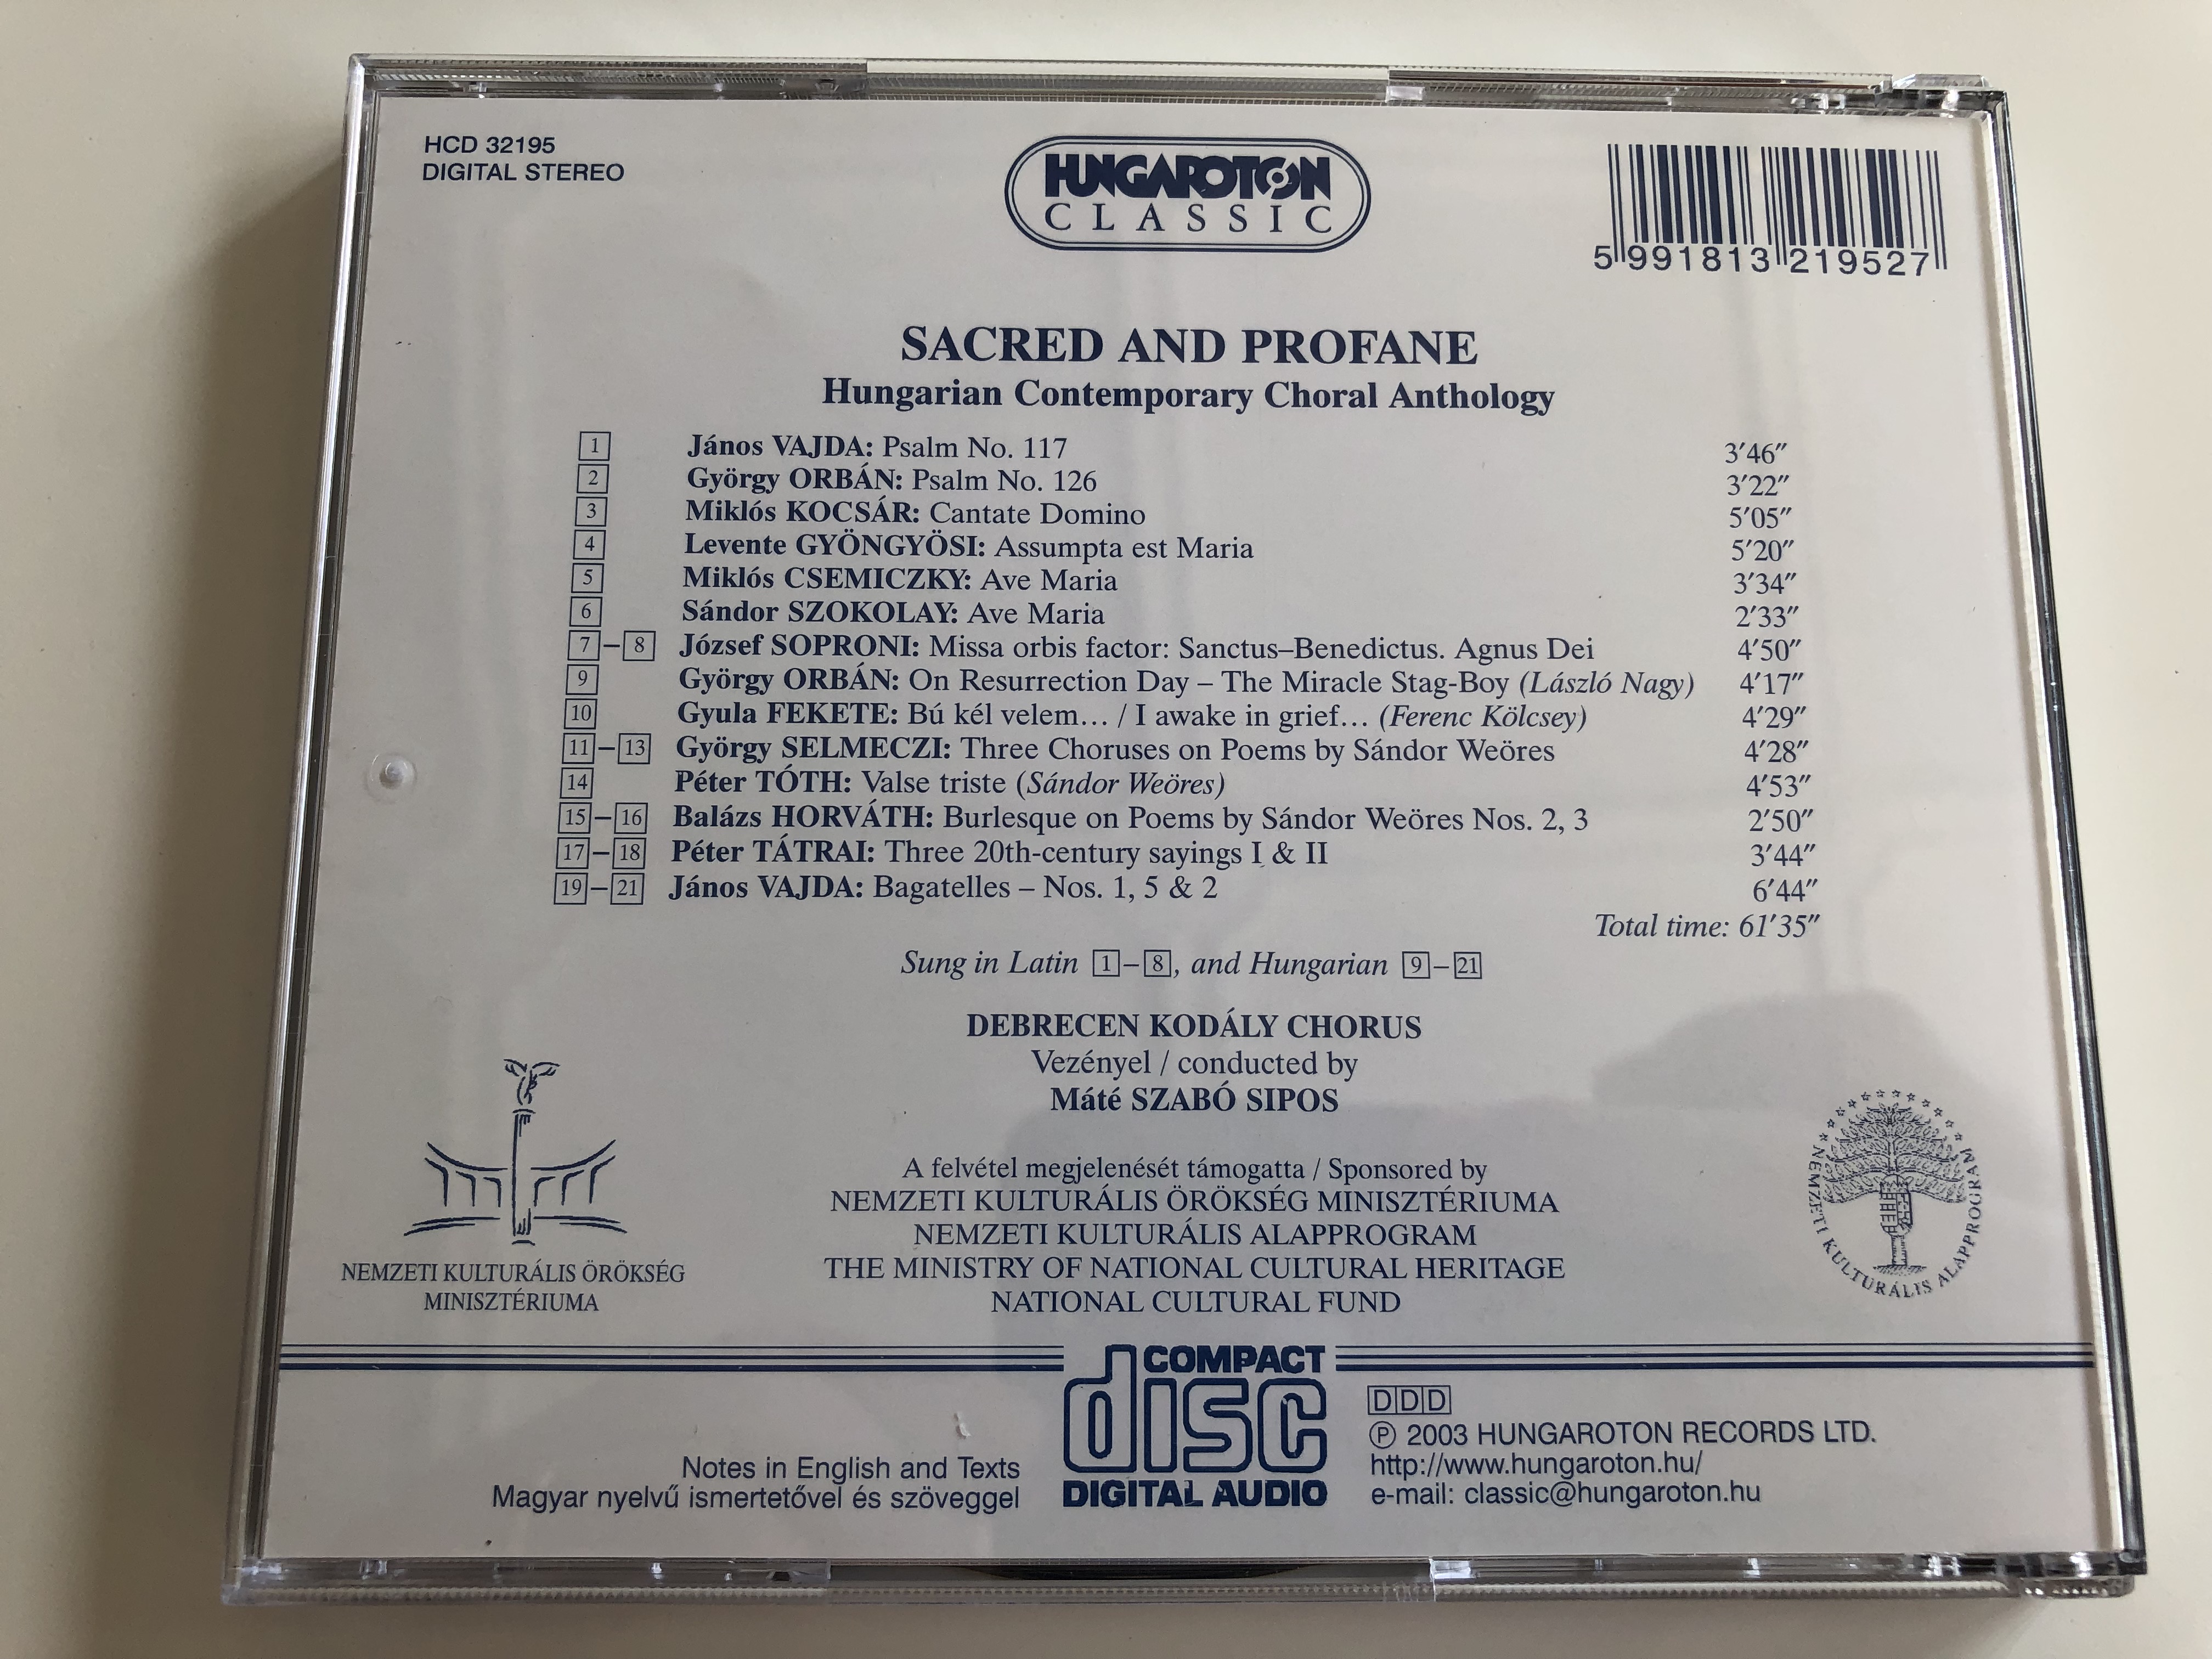 sacred-profane-hungarian-contemporary-choral-anthology-debrecen-kod-ly-chorus-conducted-by-m-t-szab-sipos-hungaroton-classic-audio-cd-2003-hcd-32195-11-.jpg